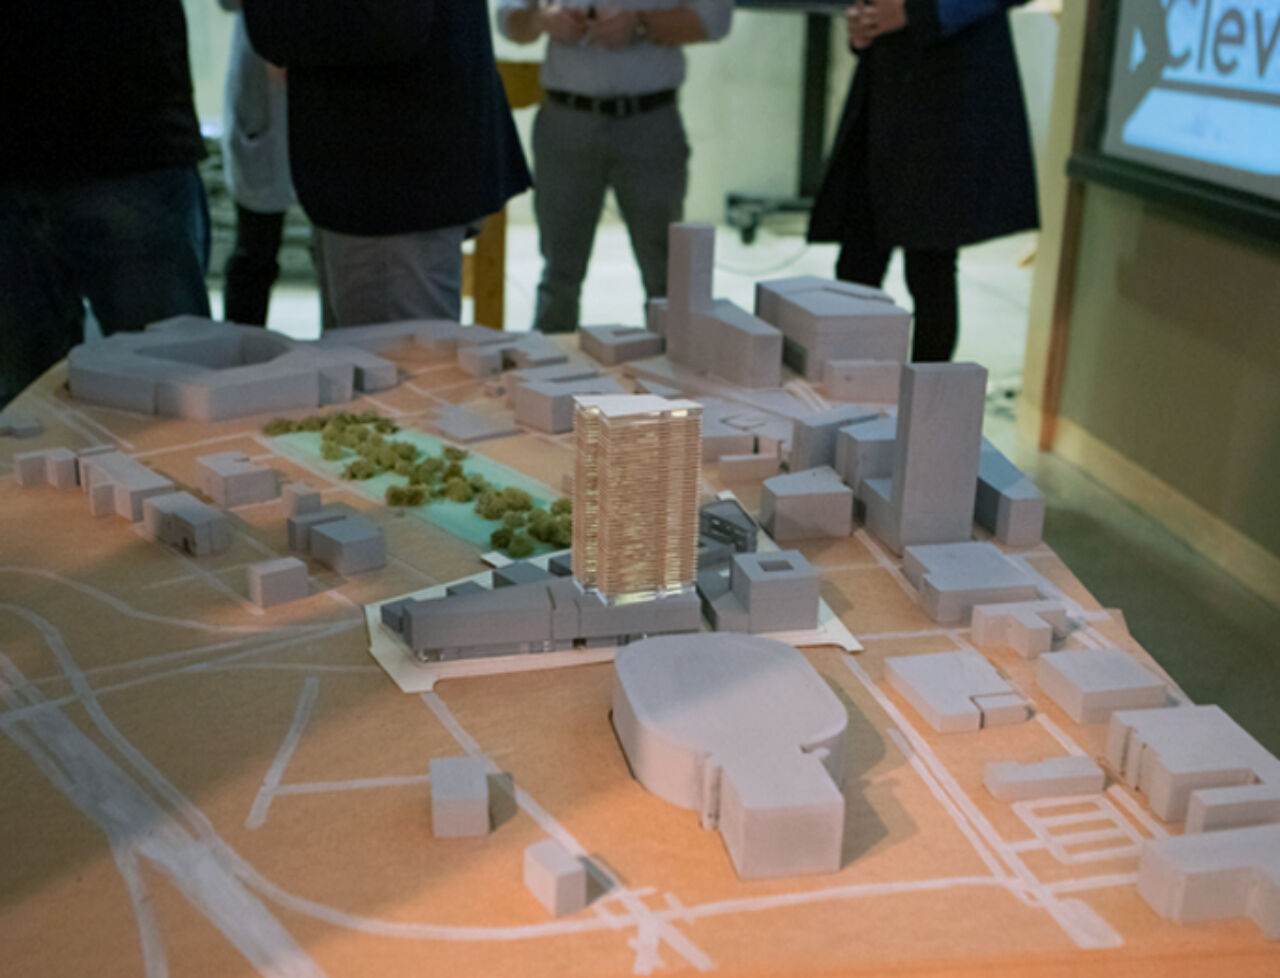 Cleveland Studio Review event showcasing a table mockup of buildings and landscape architecture.